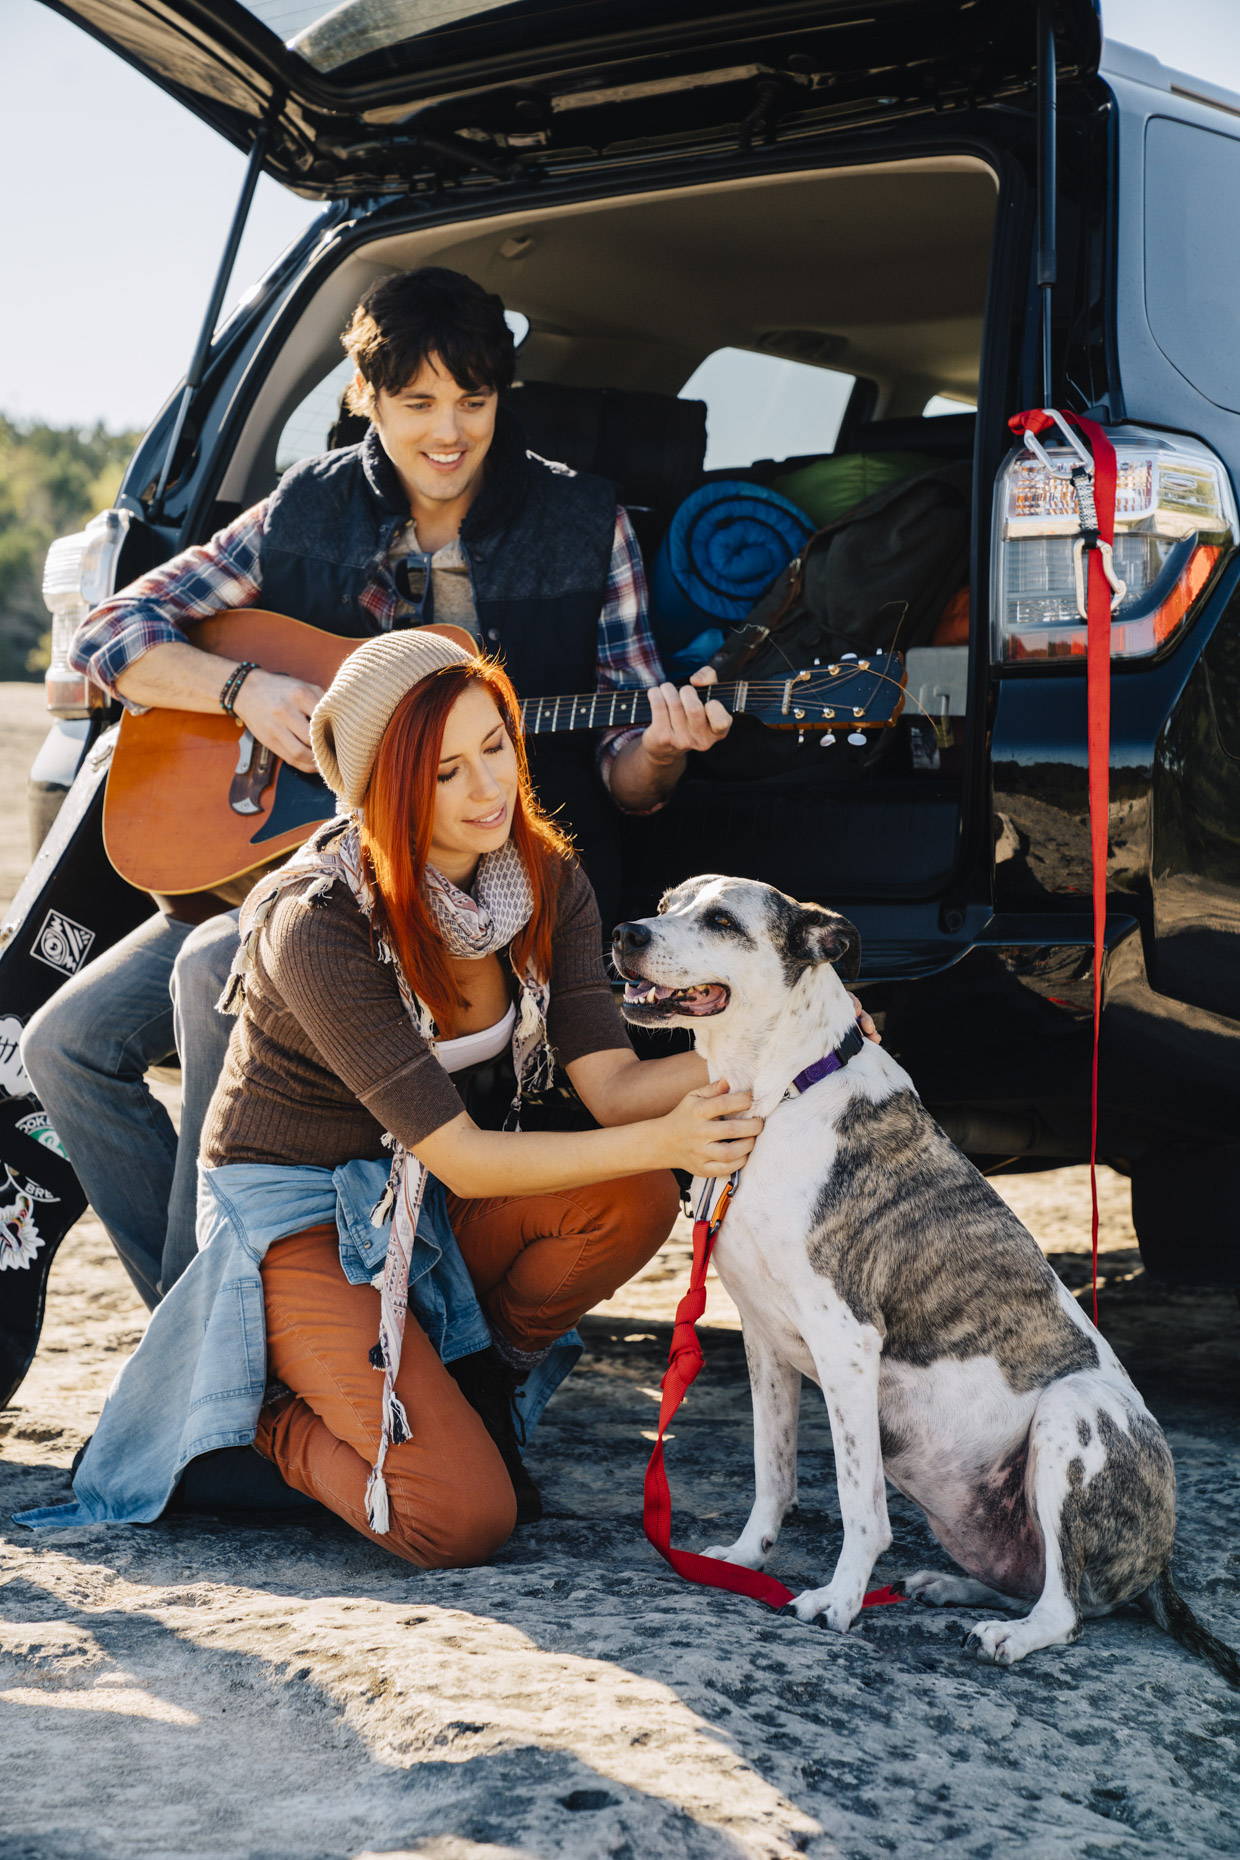 Man playing guitar in back of truck while woman pets dog